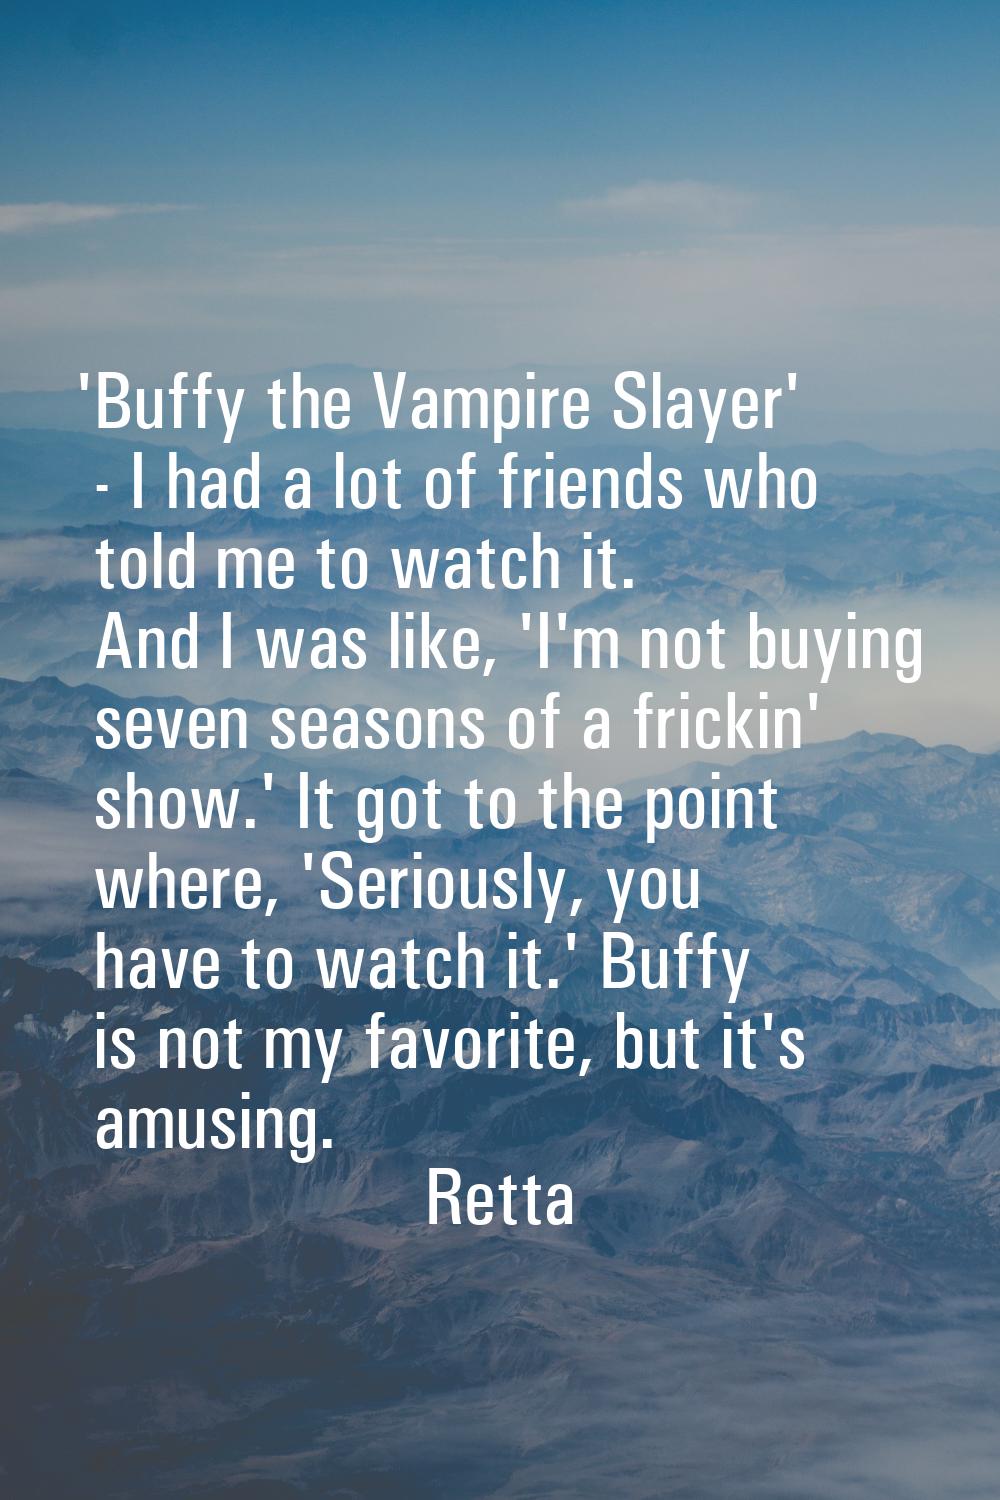 'Buffy the Vampire Slayer' - I had a lot of friends who told me to watch it. And I was like, 'I'm n